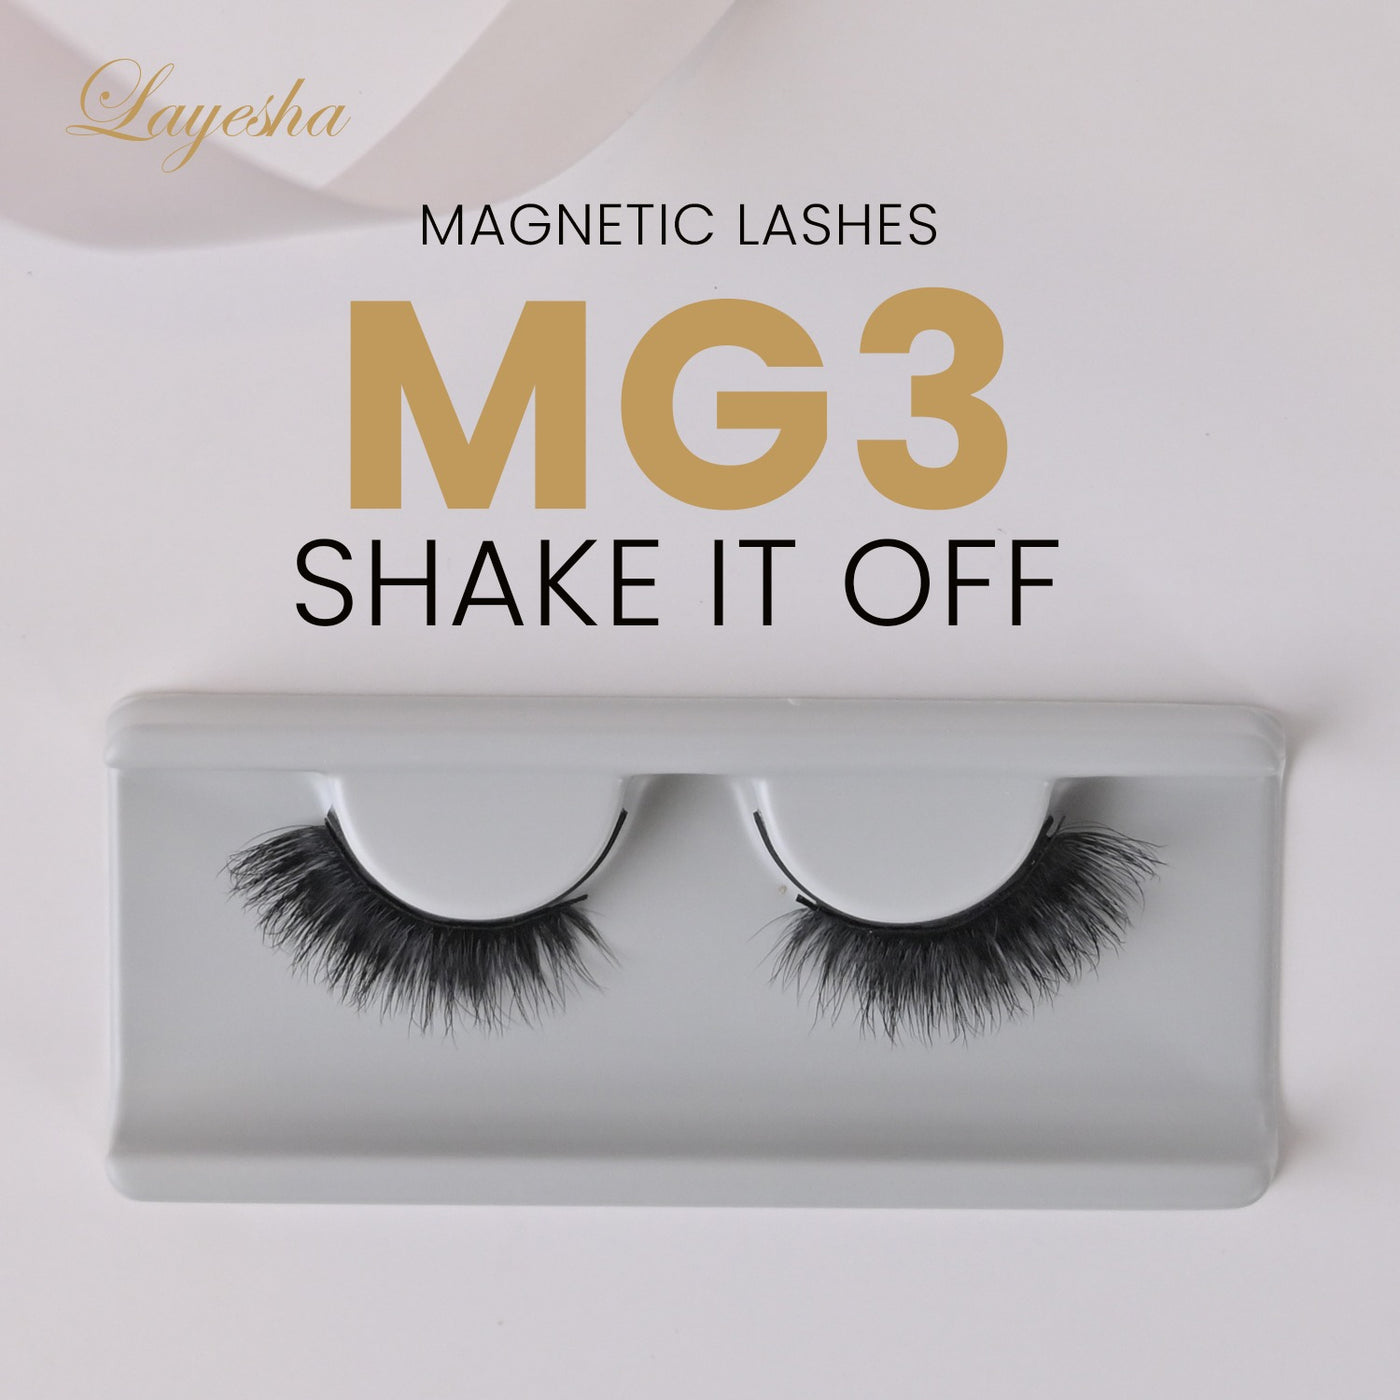 MG 3 SHAKE IT OFF (Magnetic Lashes)